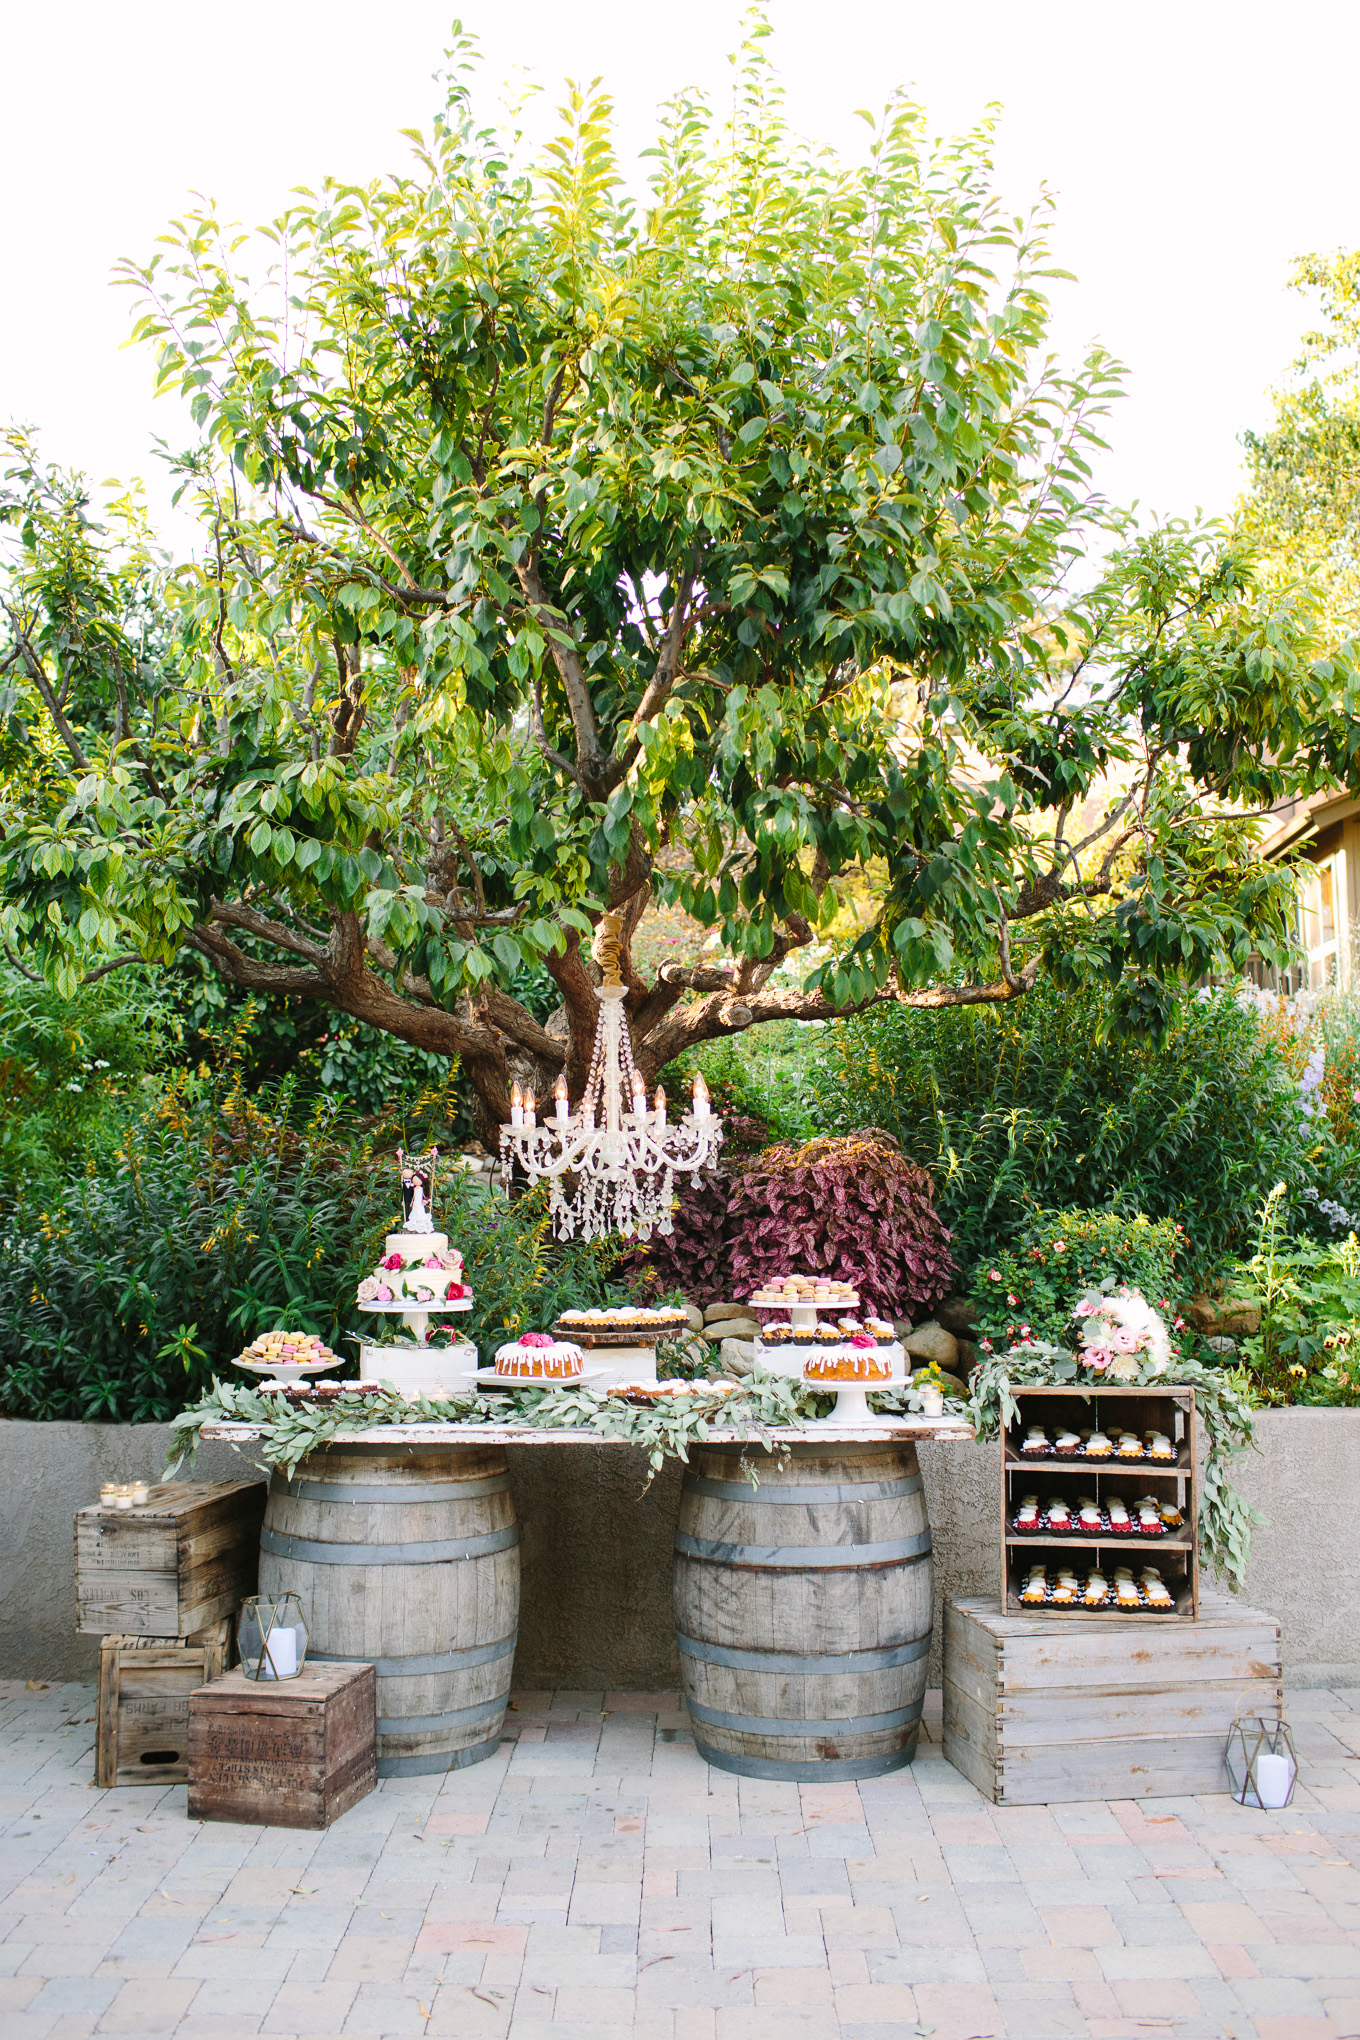 Maravilla Gardens wedding dessert table | Best Southern California Garden Wedding Venues | Colorful and elevated wedding photography for fun-loving couples | #gardenvenue #weddingvenue #socalweddingvenue #bouquetideas #uniquebouquet   Source: Mary Costa Photography | Los Angeles 